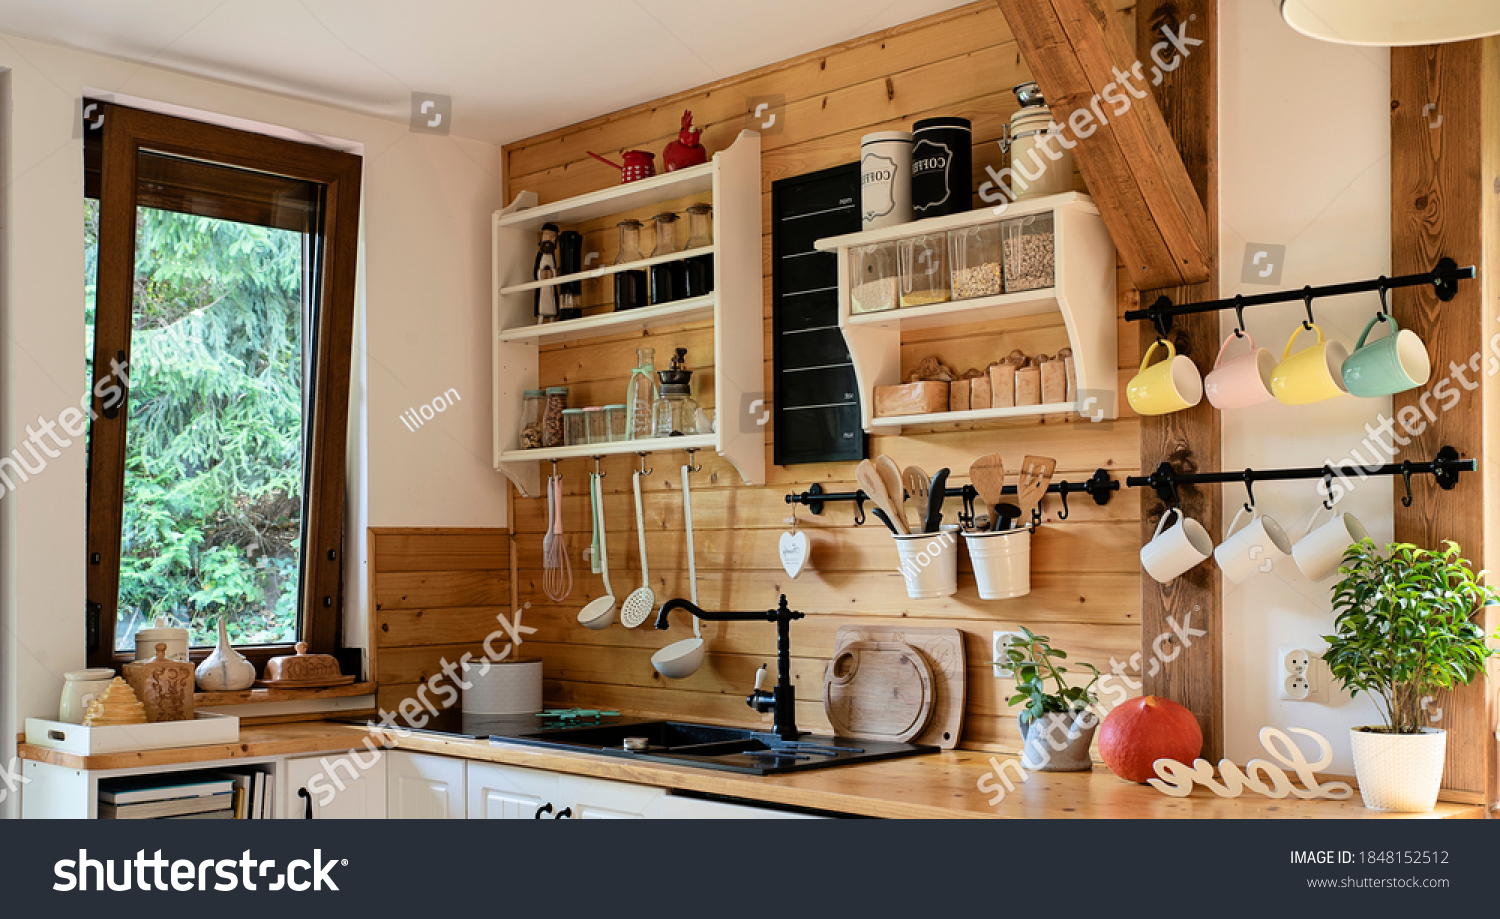 Vintage rustic kitchen in wooden cottage with window and kitchenware. Interior with wooden wall and mug in rural style. Banner #1848152512